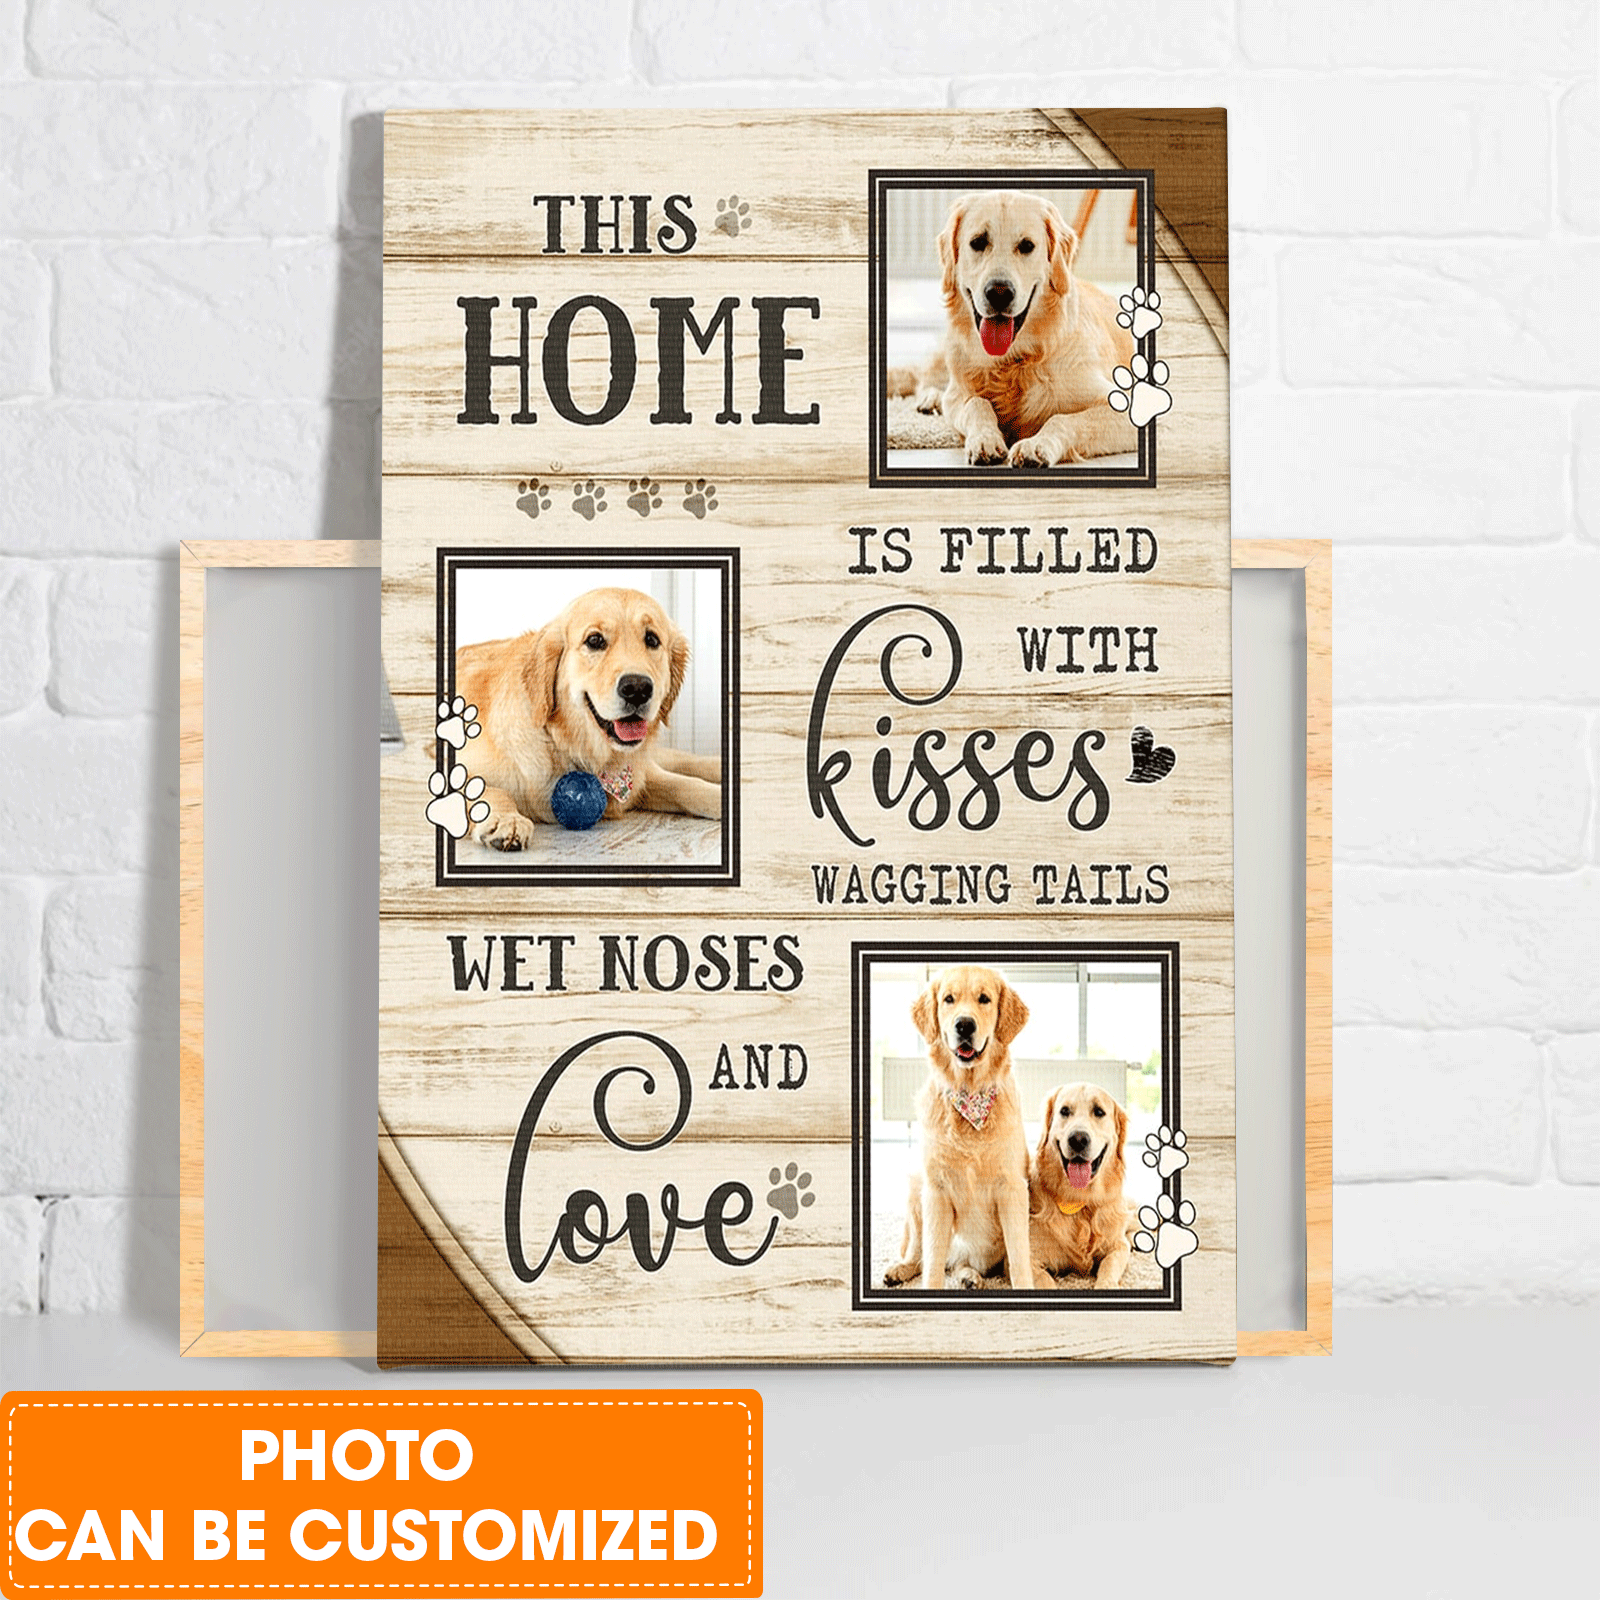 Personalized Dog Portrait Canvas, Custom Pet Gifts This Home Is Filled With Kisses Pet Photo Collage Canvas, Perfect Gift For Dog Lovers, Friend, Family